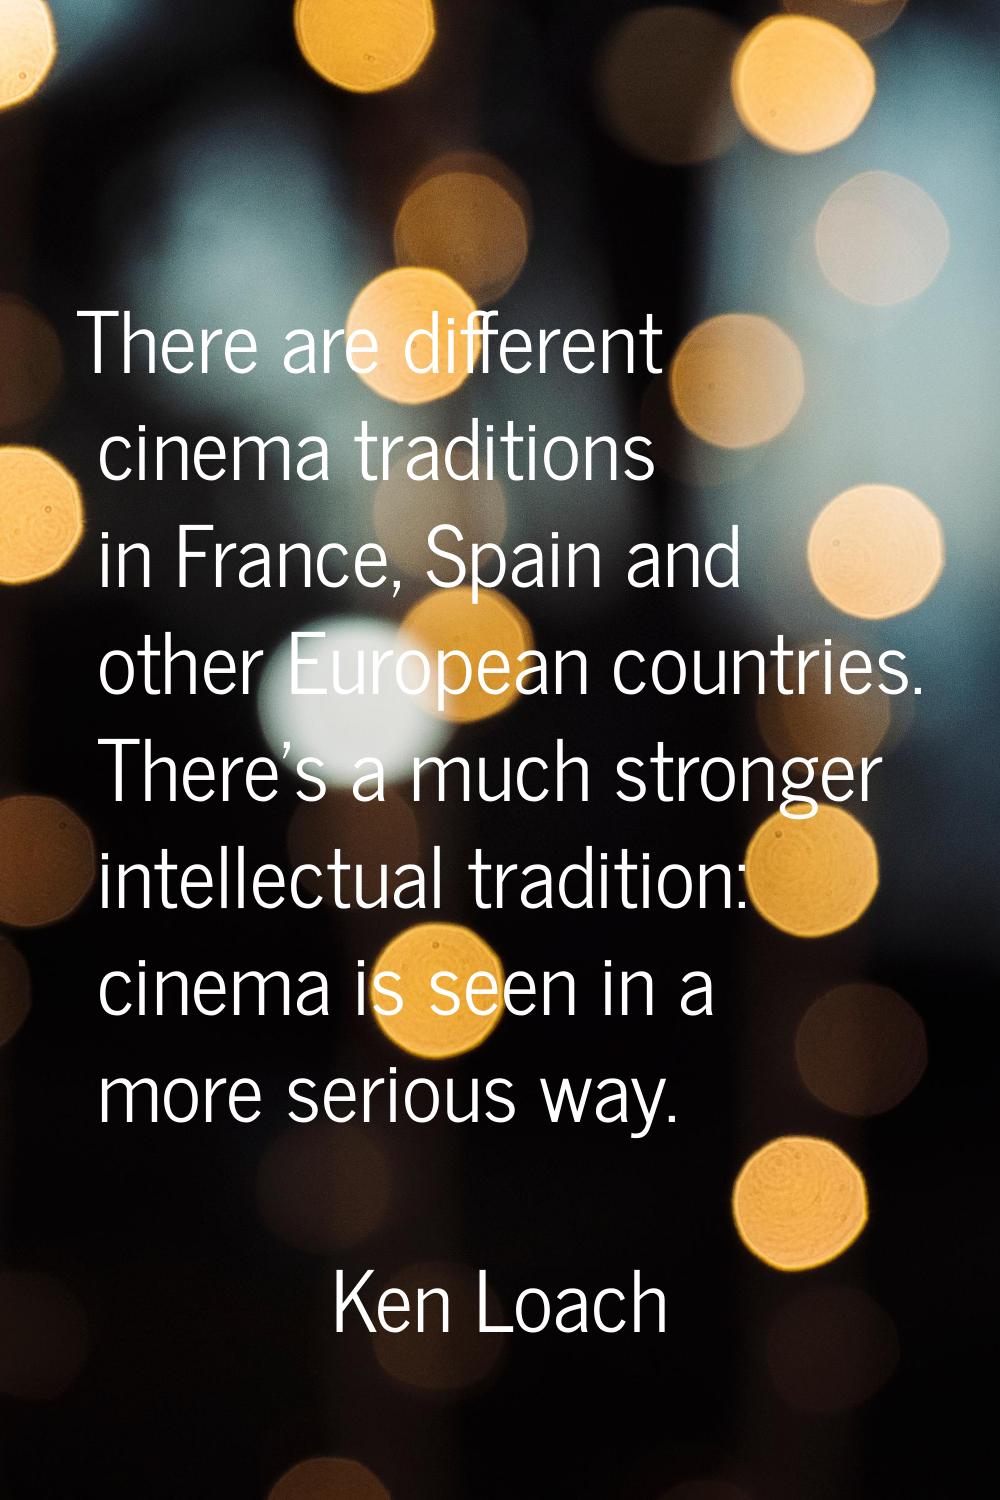 There are different cinema traditions in France, Spain and other European countries. There's a much